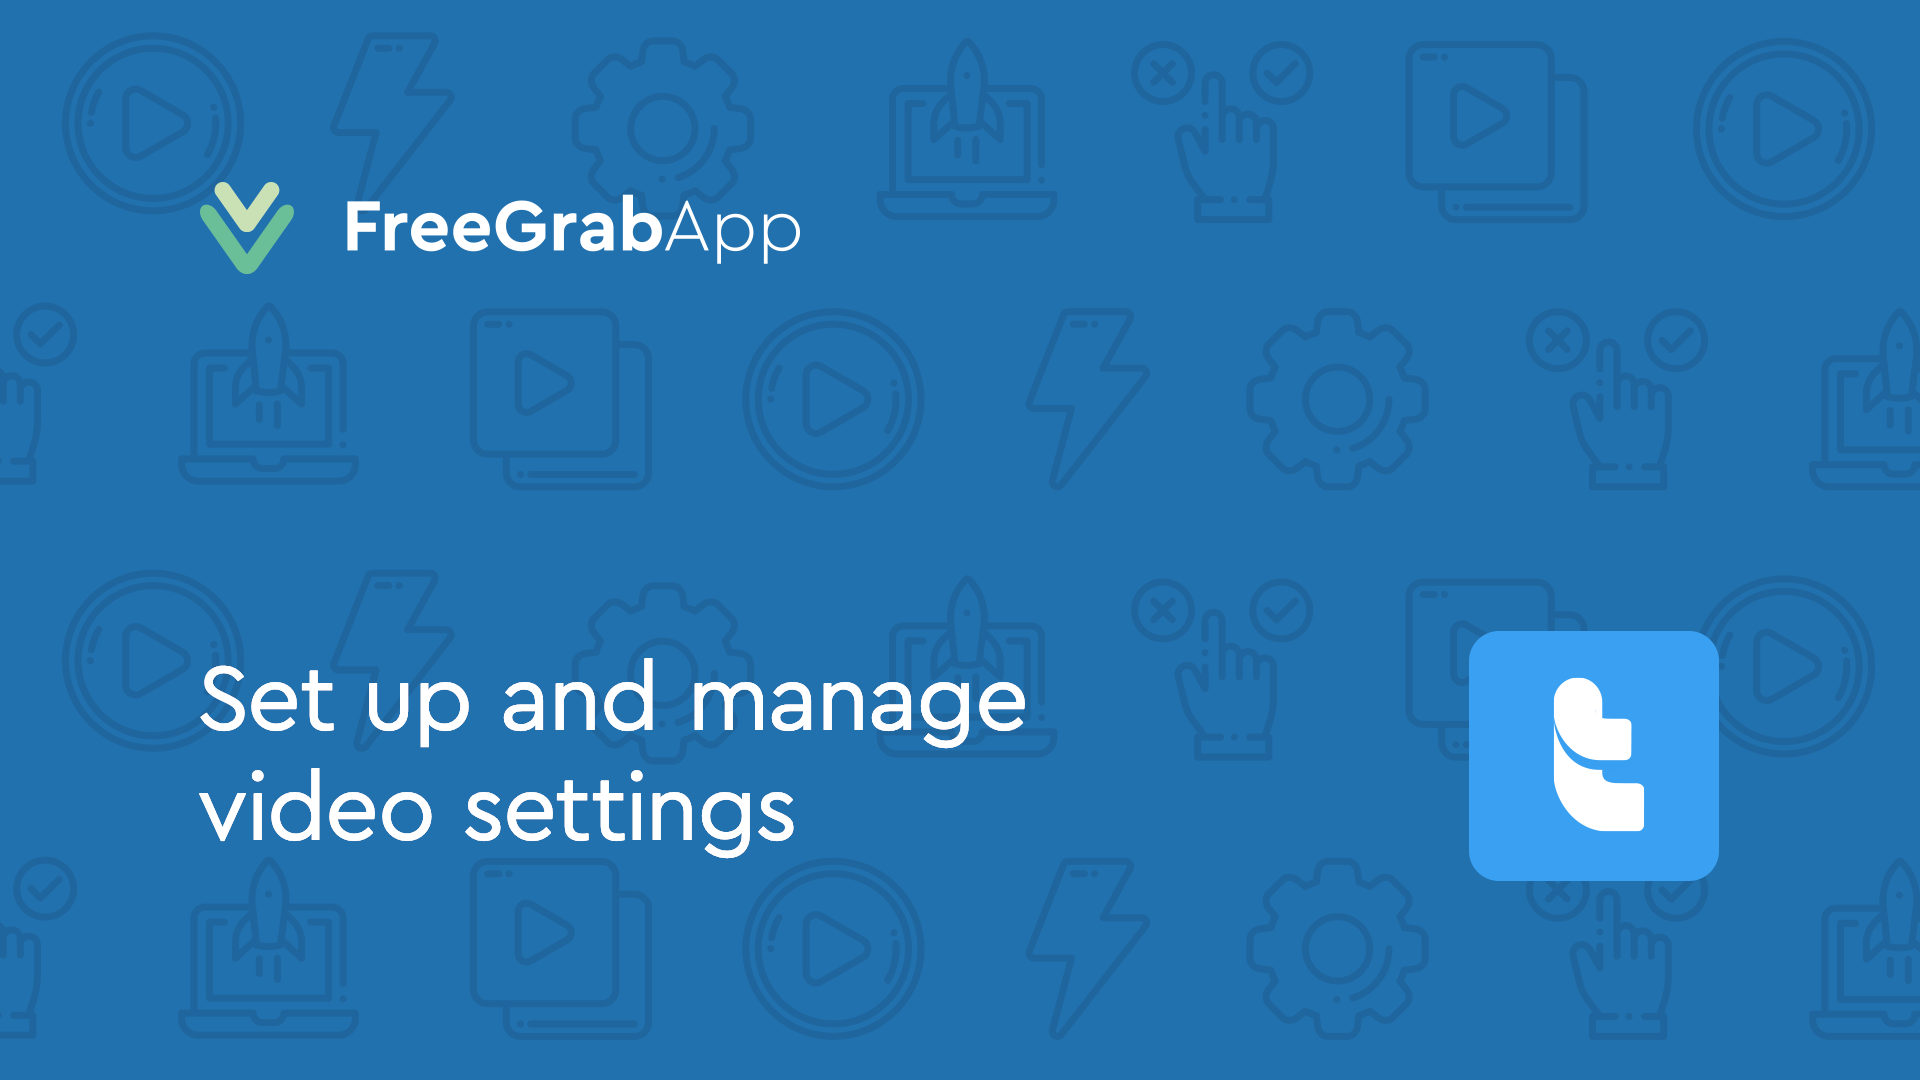 Free Twitter Download – Set up and manage video settings